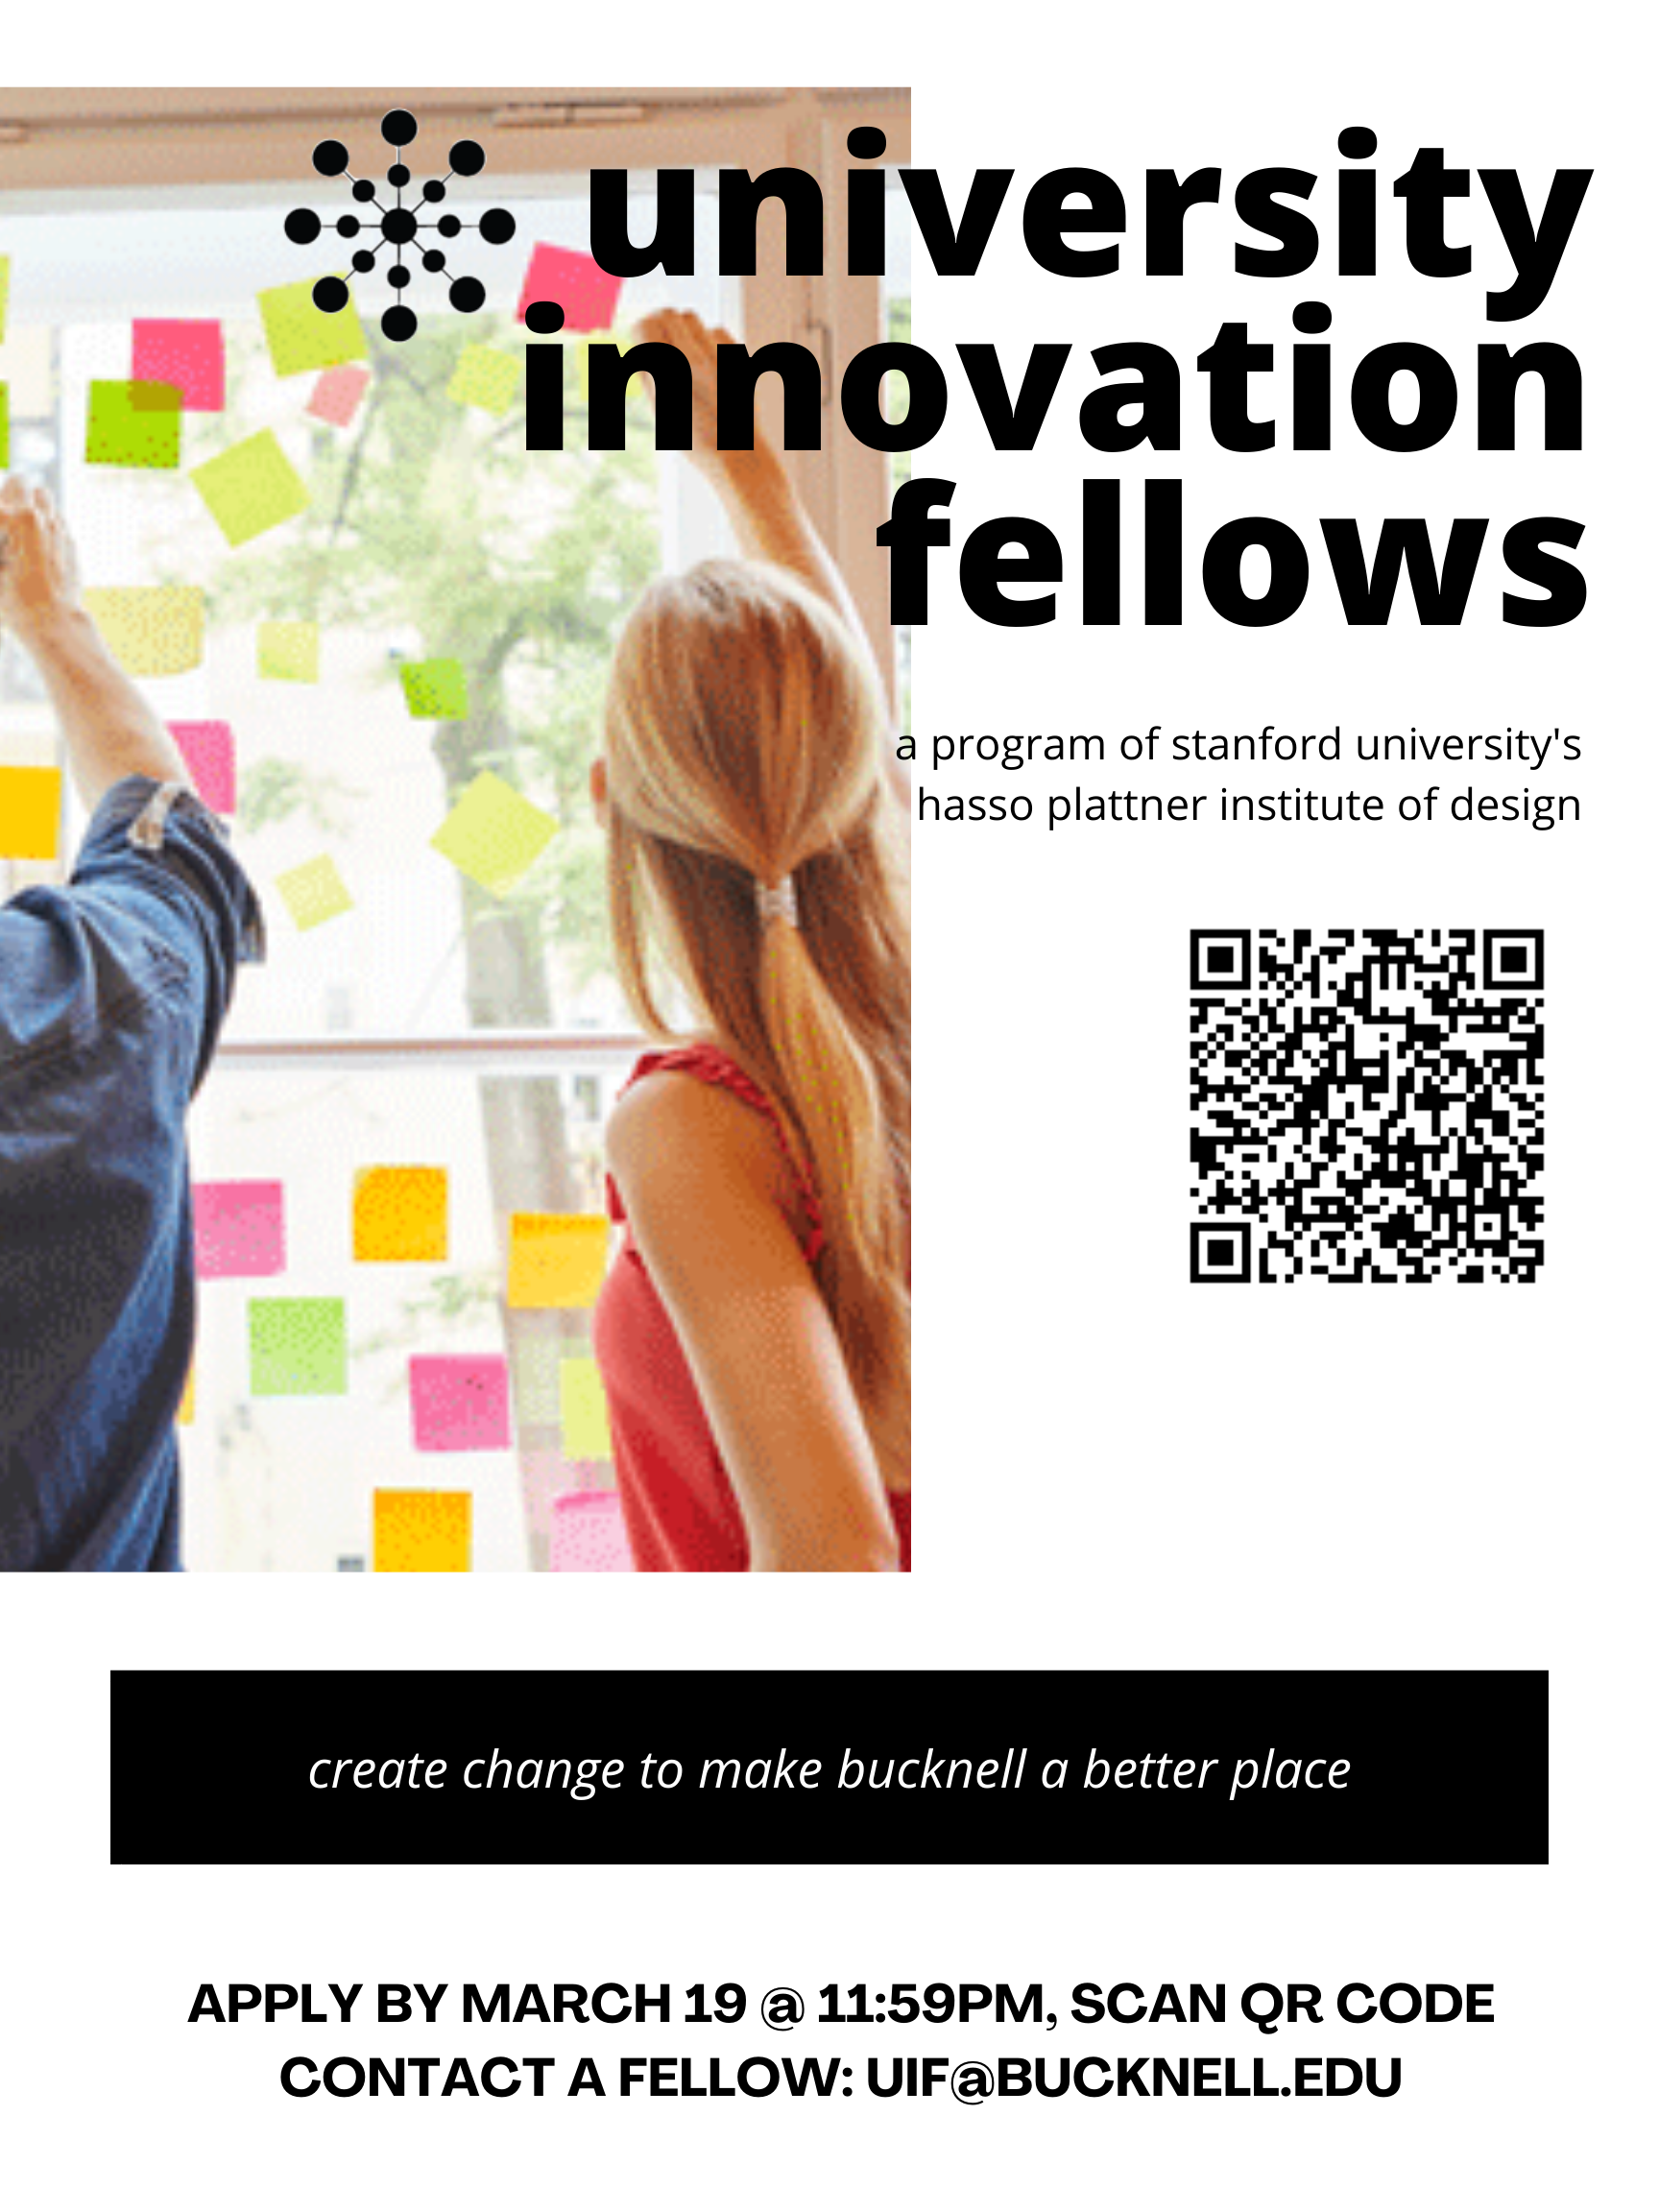 Applications being accepted for University Innovation Fellows!